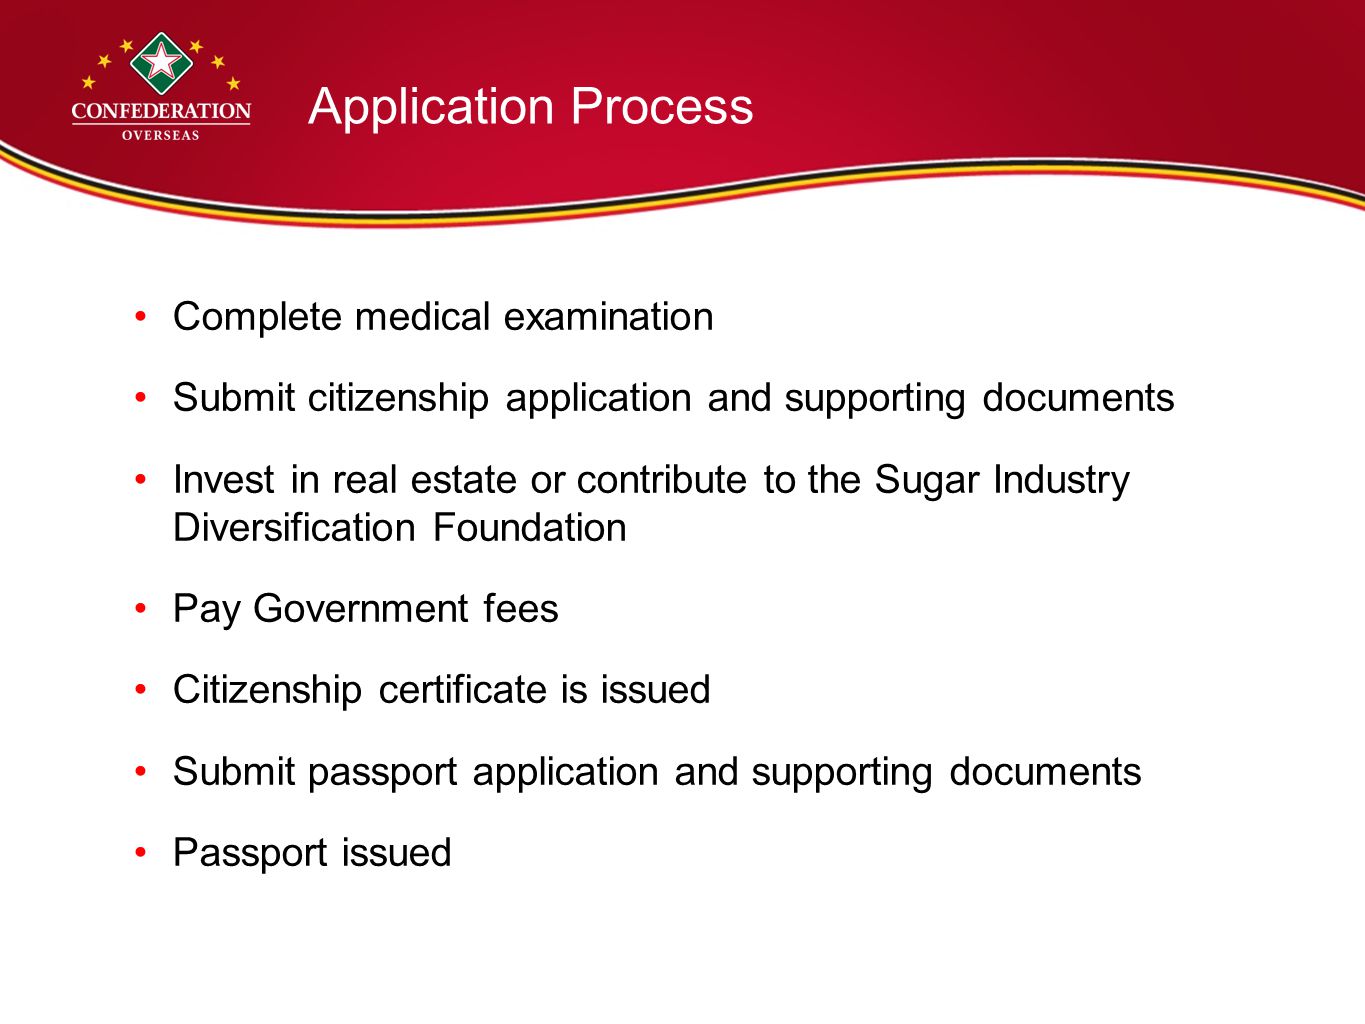 Application Process Complete medical examination Submit citizenship application and supporting documents Invest in real estate or contribute to the Sugar Industry Diversification Foundation Pay Government fees Citizenship certificate is issued Submit passport application and supporting documents Passport issued